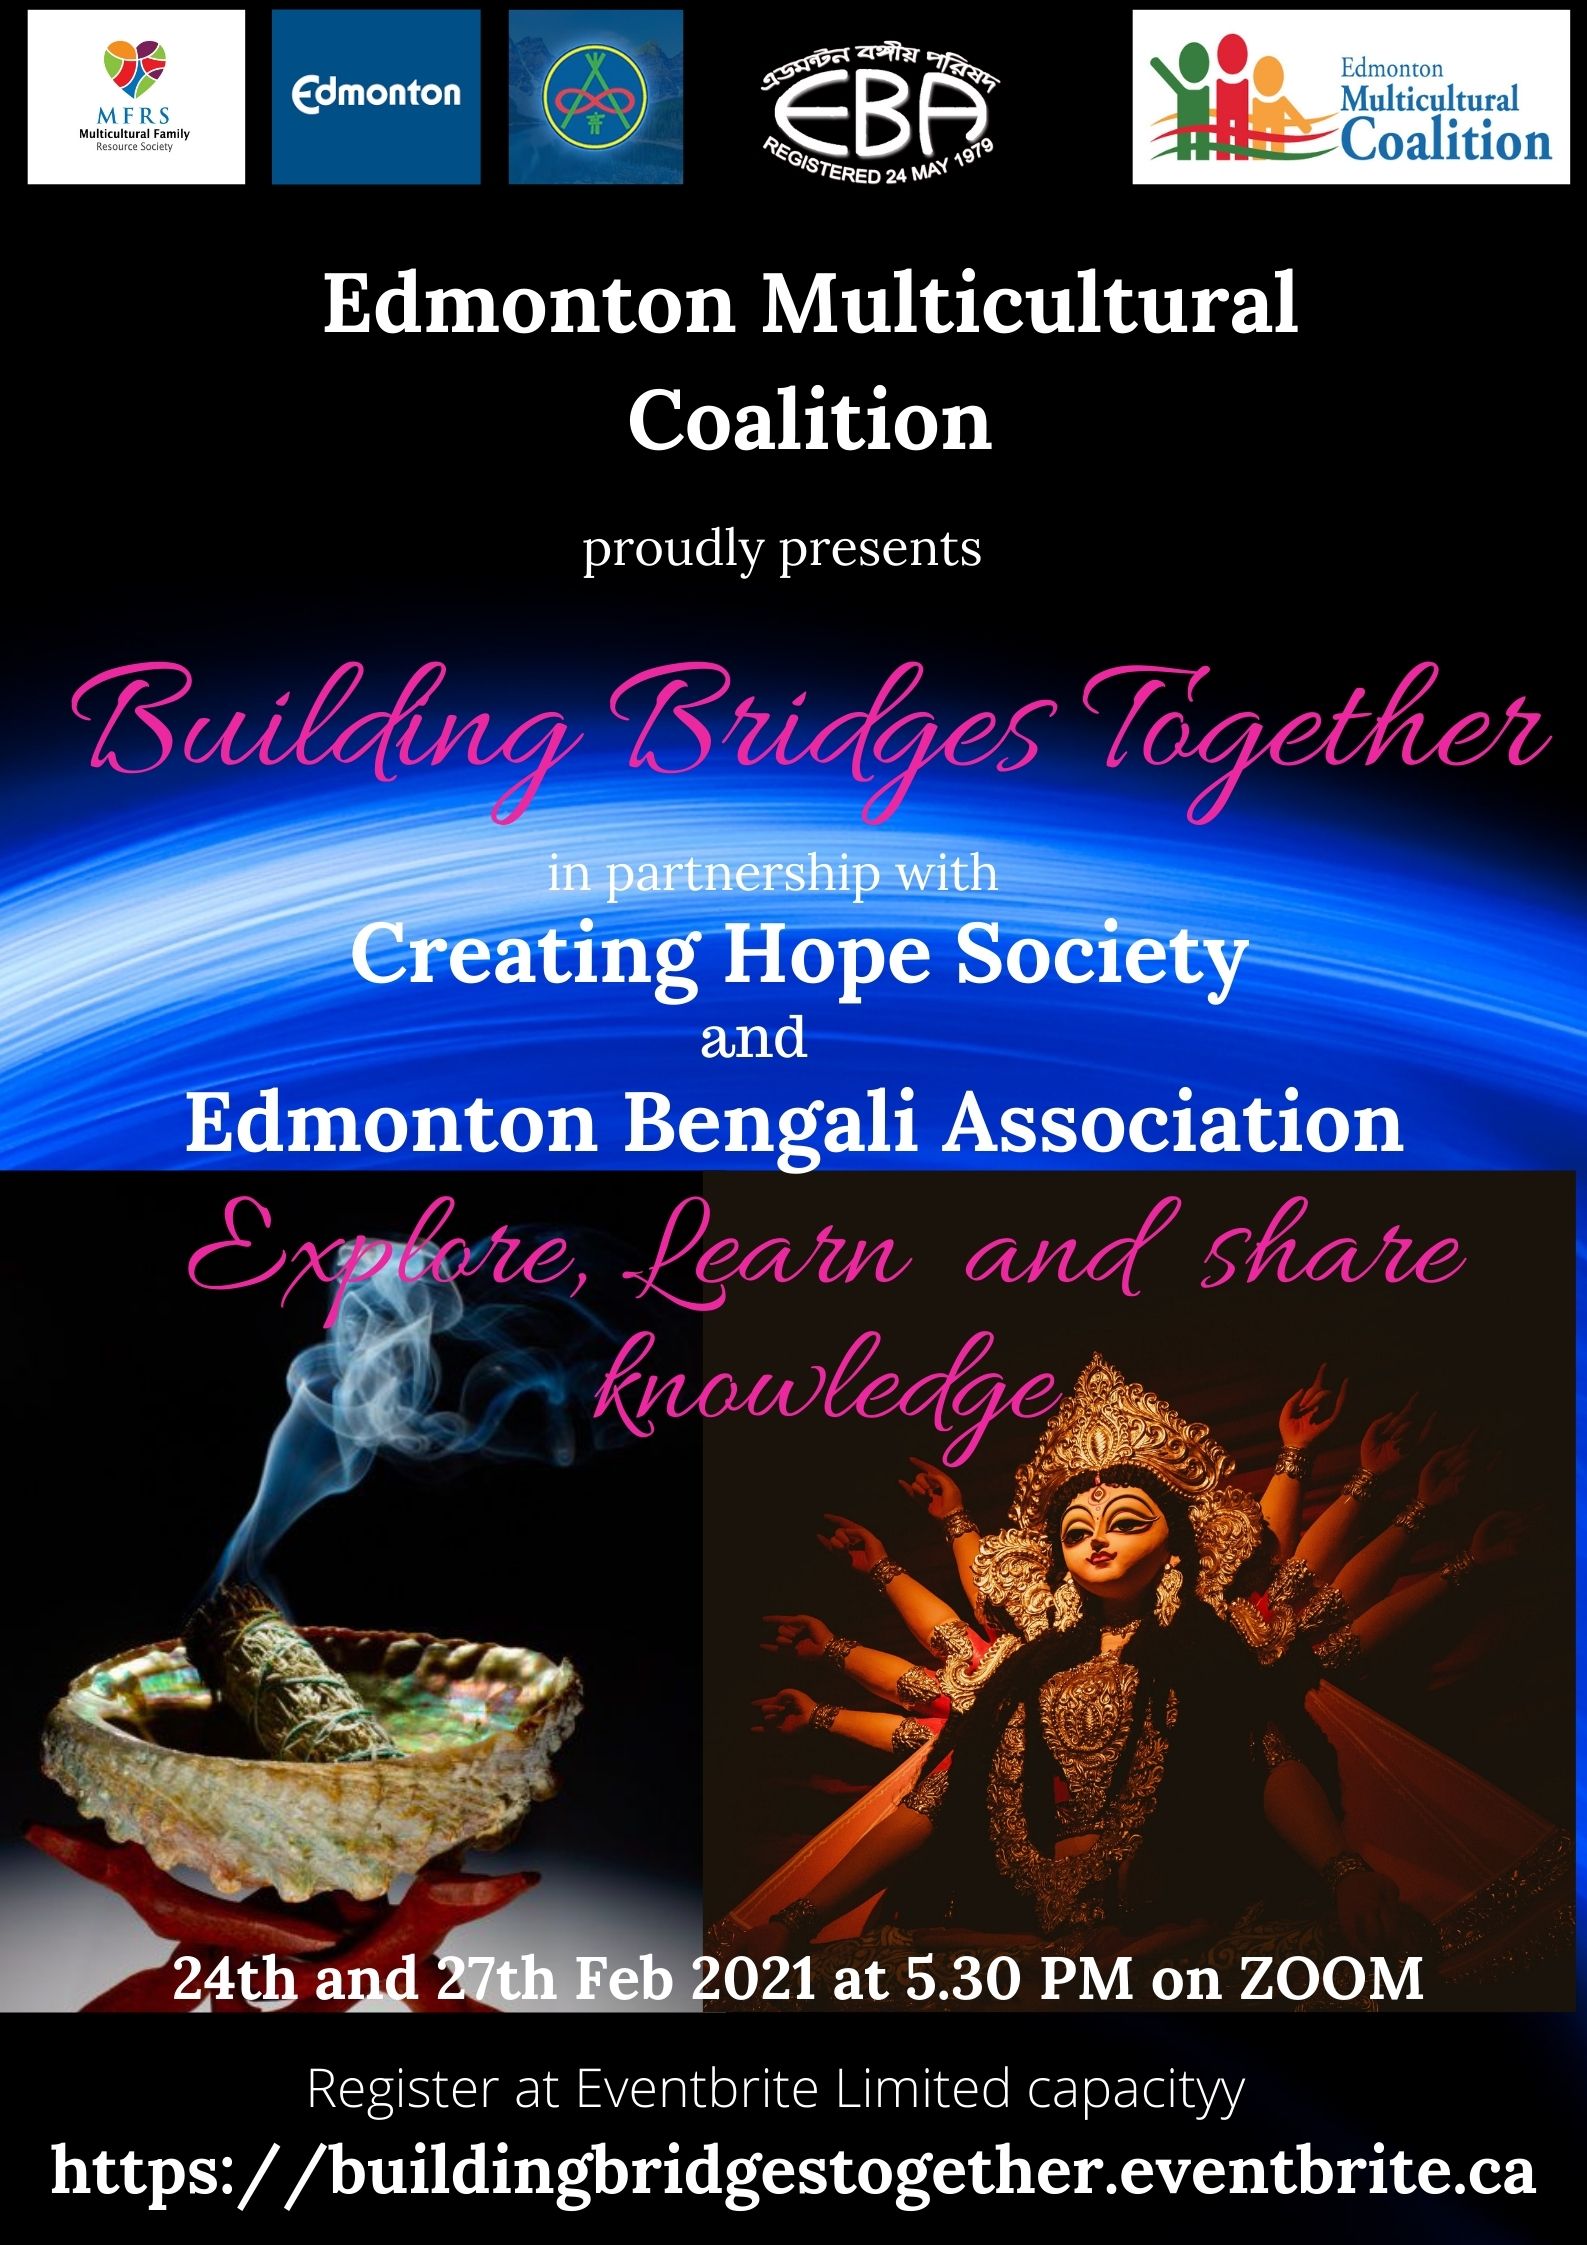 Upcoming Event on 24th and 27th Feb 2021. Building Bridges Together – Multicultural Coalition